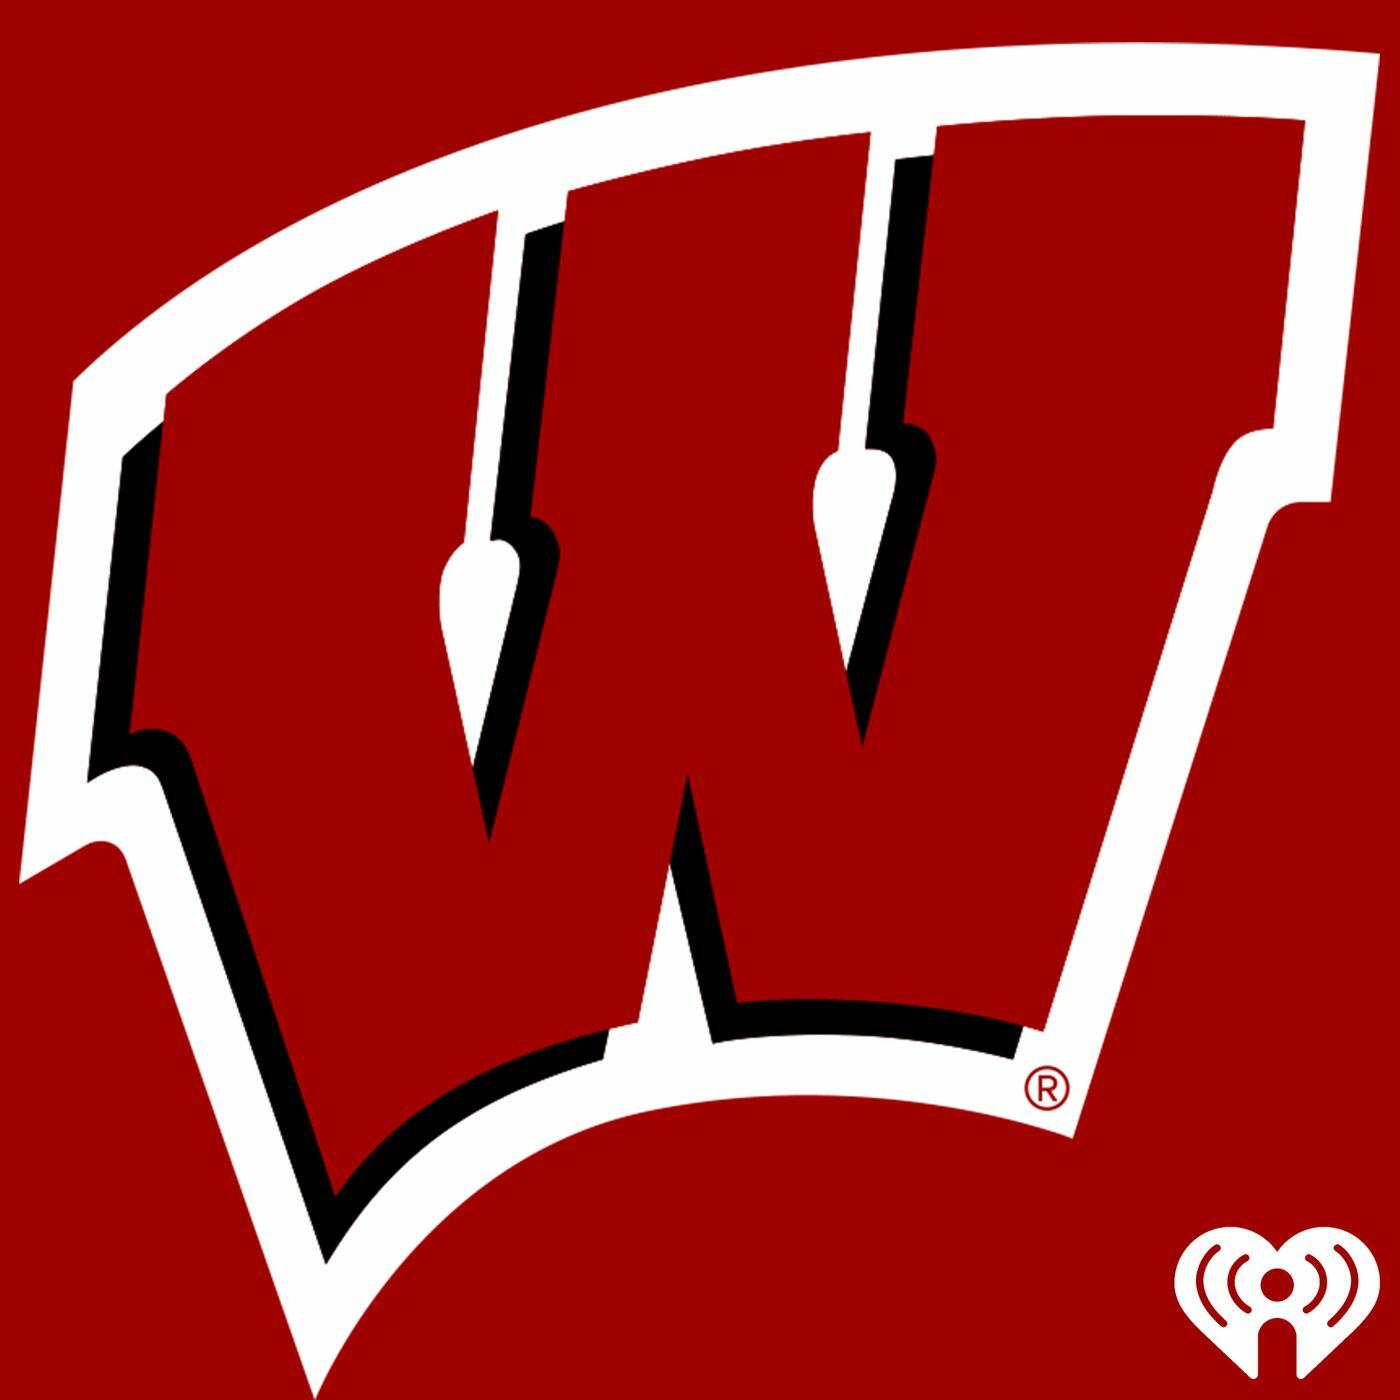 ♫ Wisconsin Badgers Sports Network Wisconsin Badgers play-by-play, coaches shows, interviews, highlights, and more from the Badgers Radio Network and Learfield